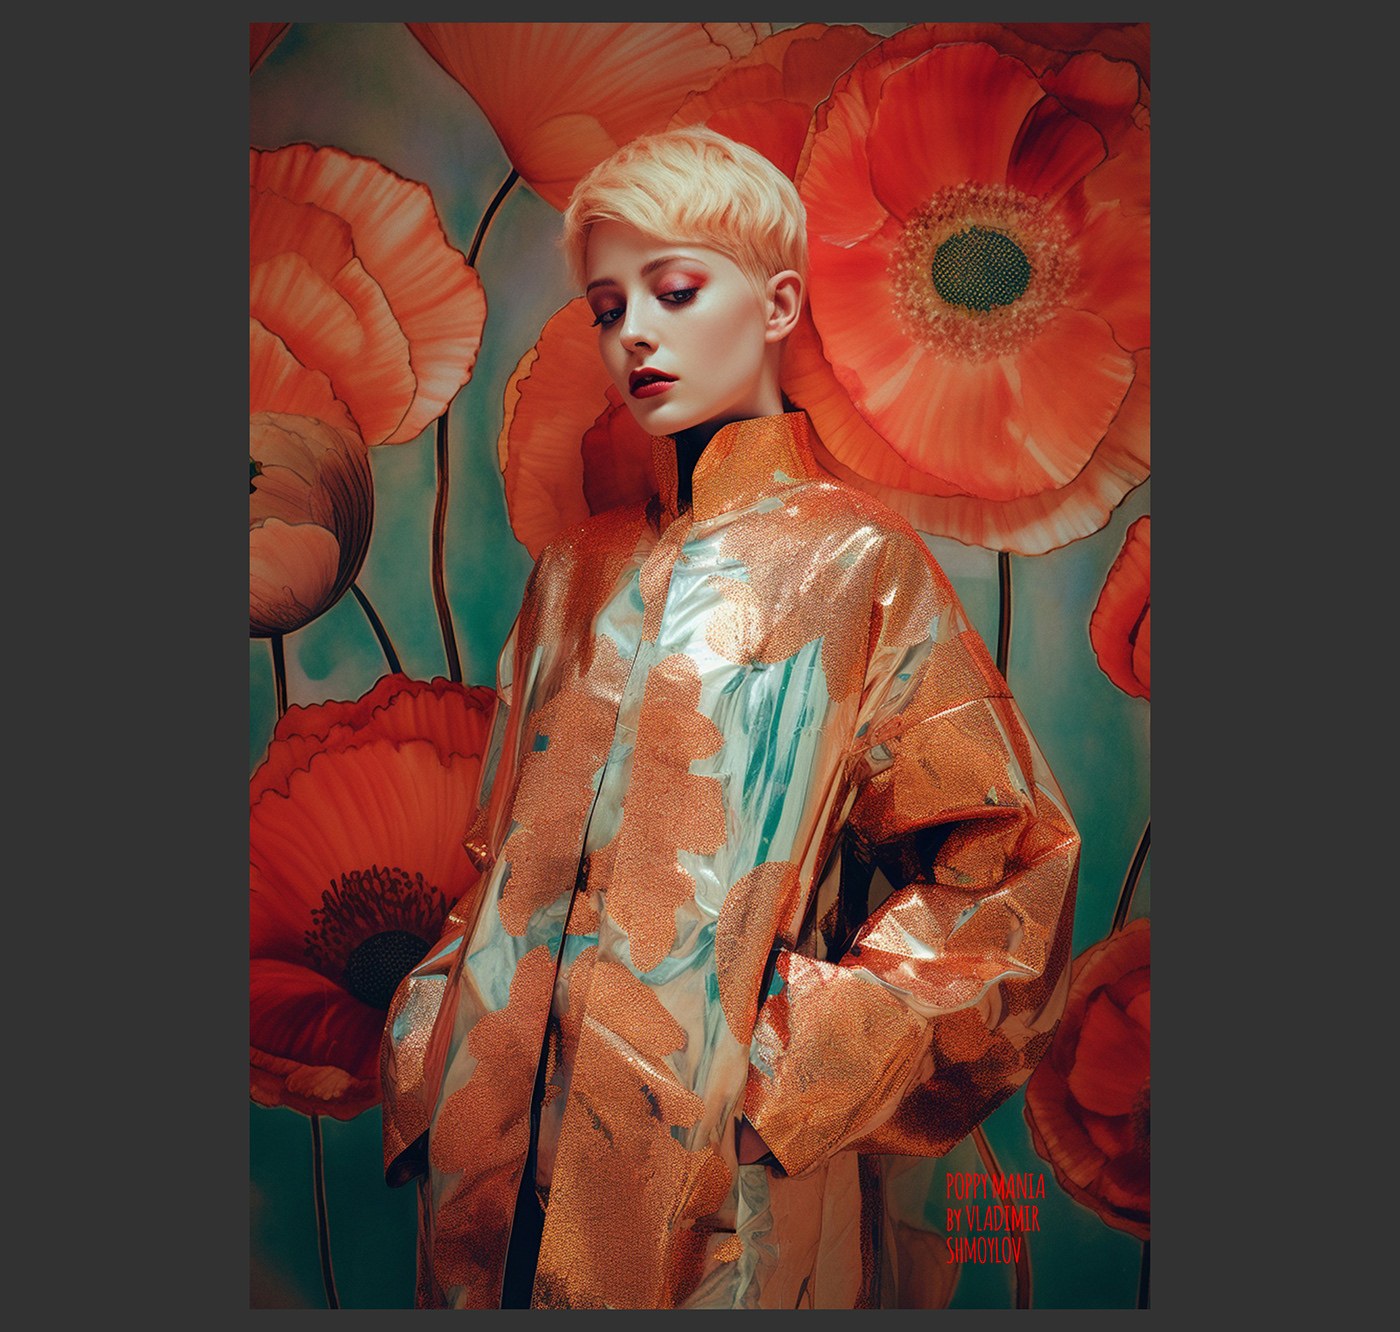 "POPPY MANIA" by Vladimir Shmoylov is a captivating project that showcases a series of portraits